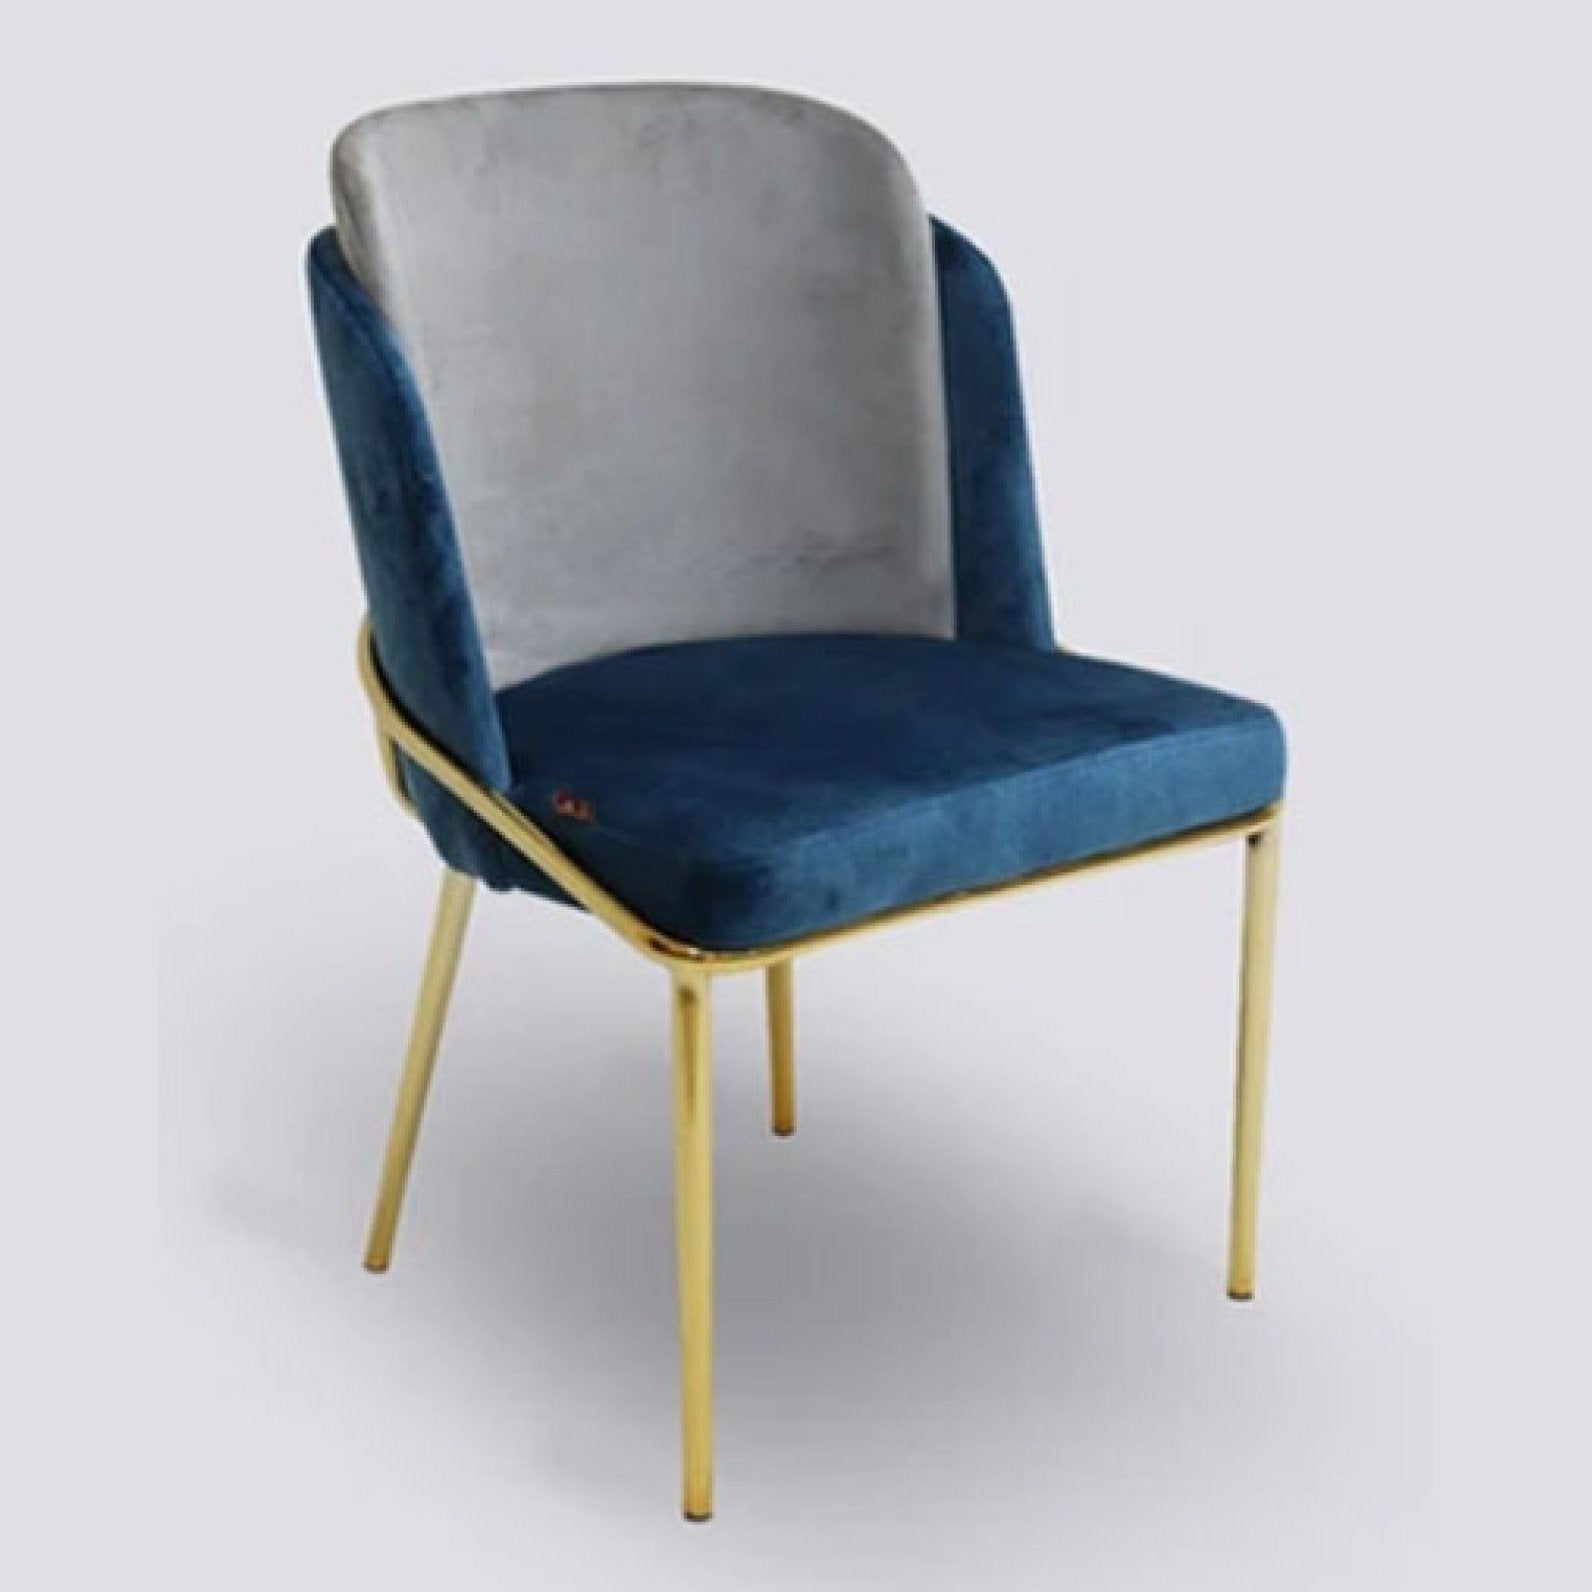 LUX-496 DINING CHAIR Mobel Furniture